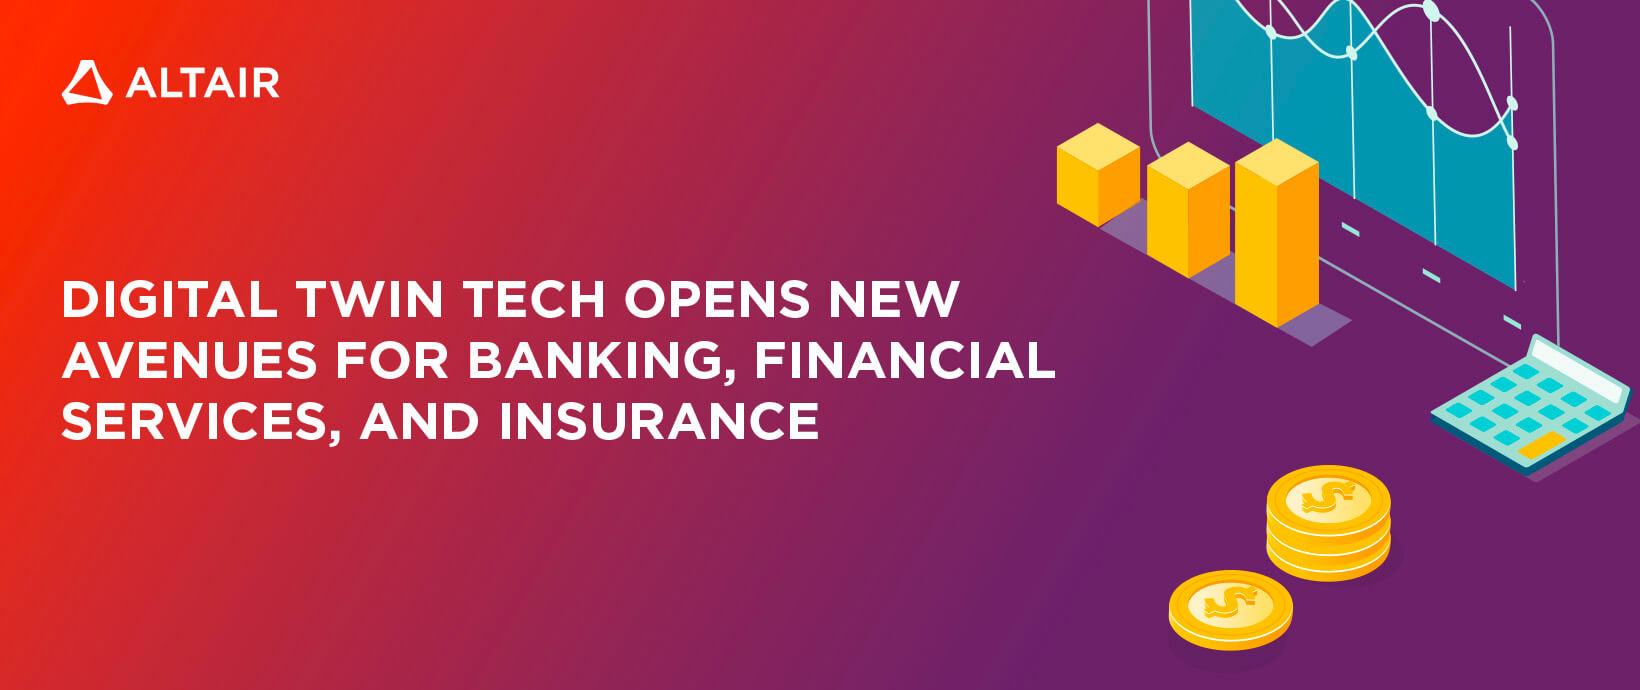 Digital Twin Tech Opens New Avenues for Banking, Financial Services, And Insurance